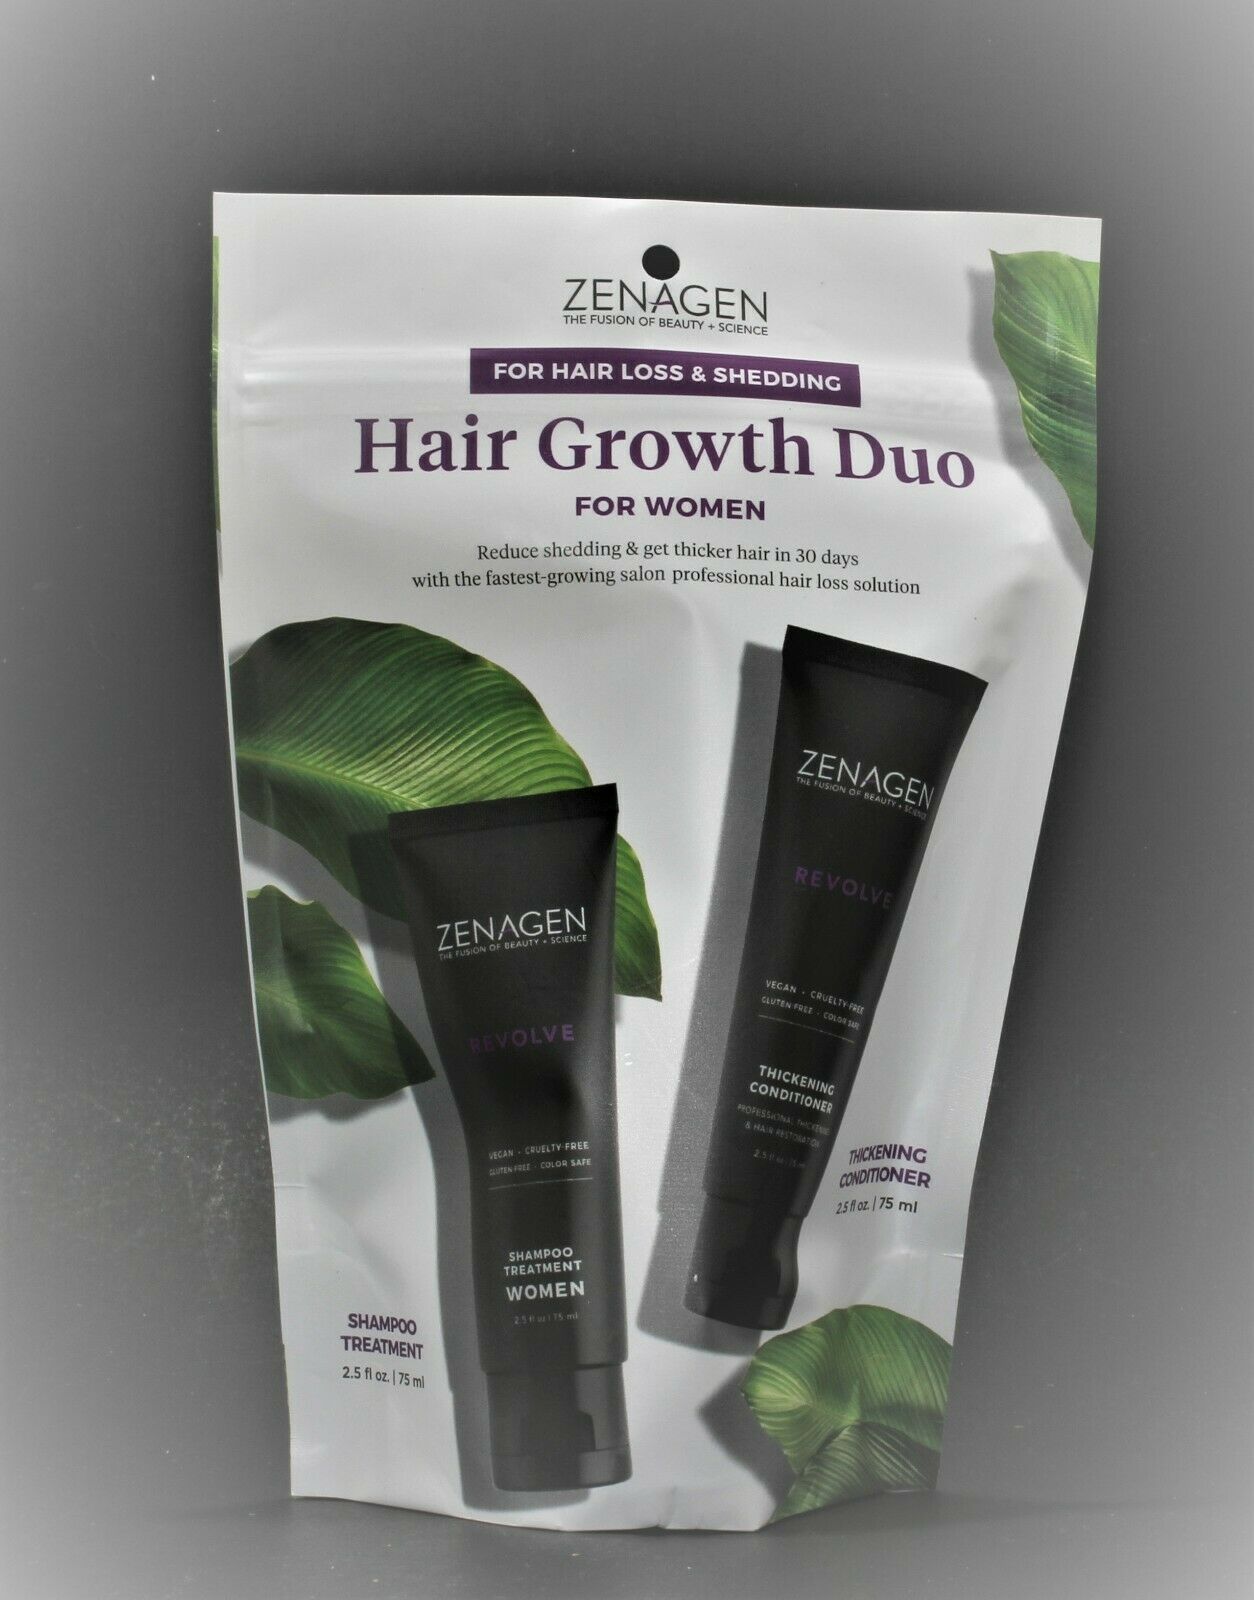 Zenagen Revolve Hair Growth Shampoo and Conditioner For Women 2.5 oz DUO